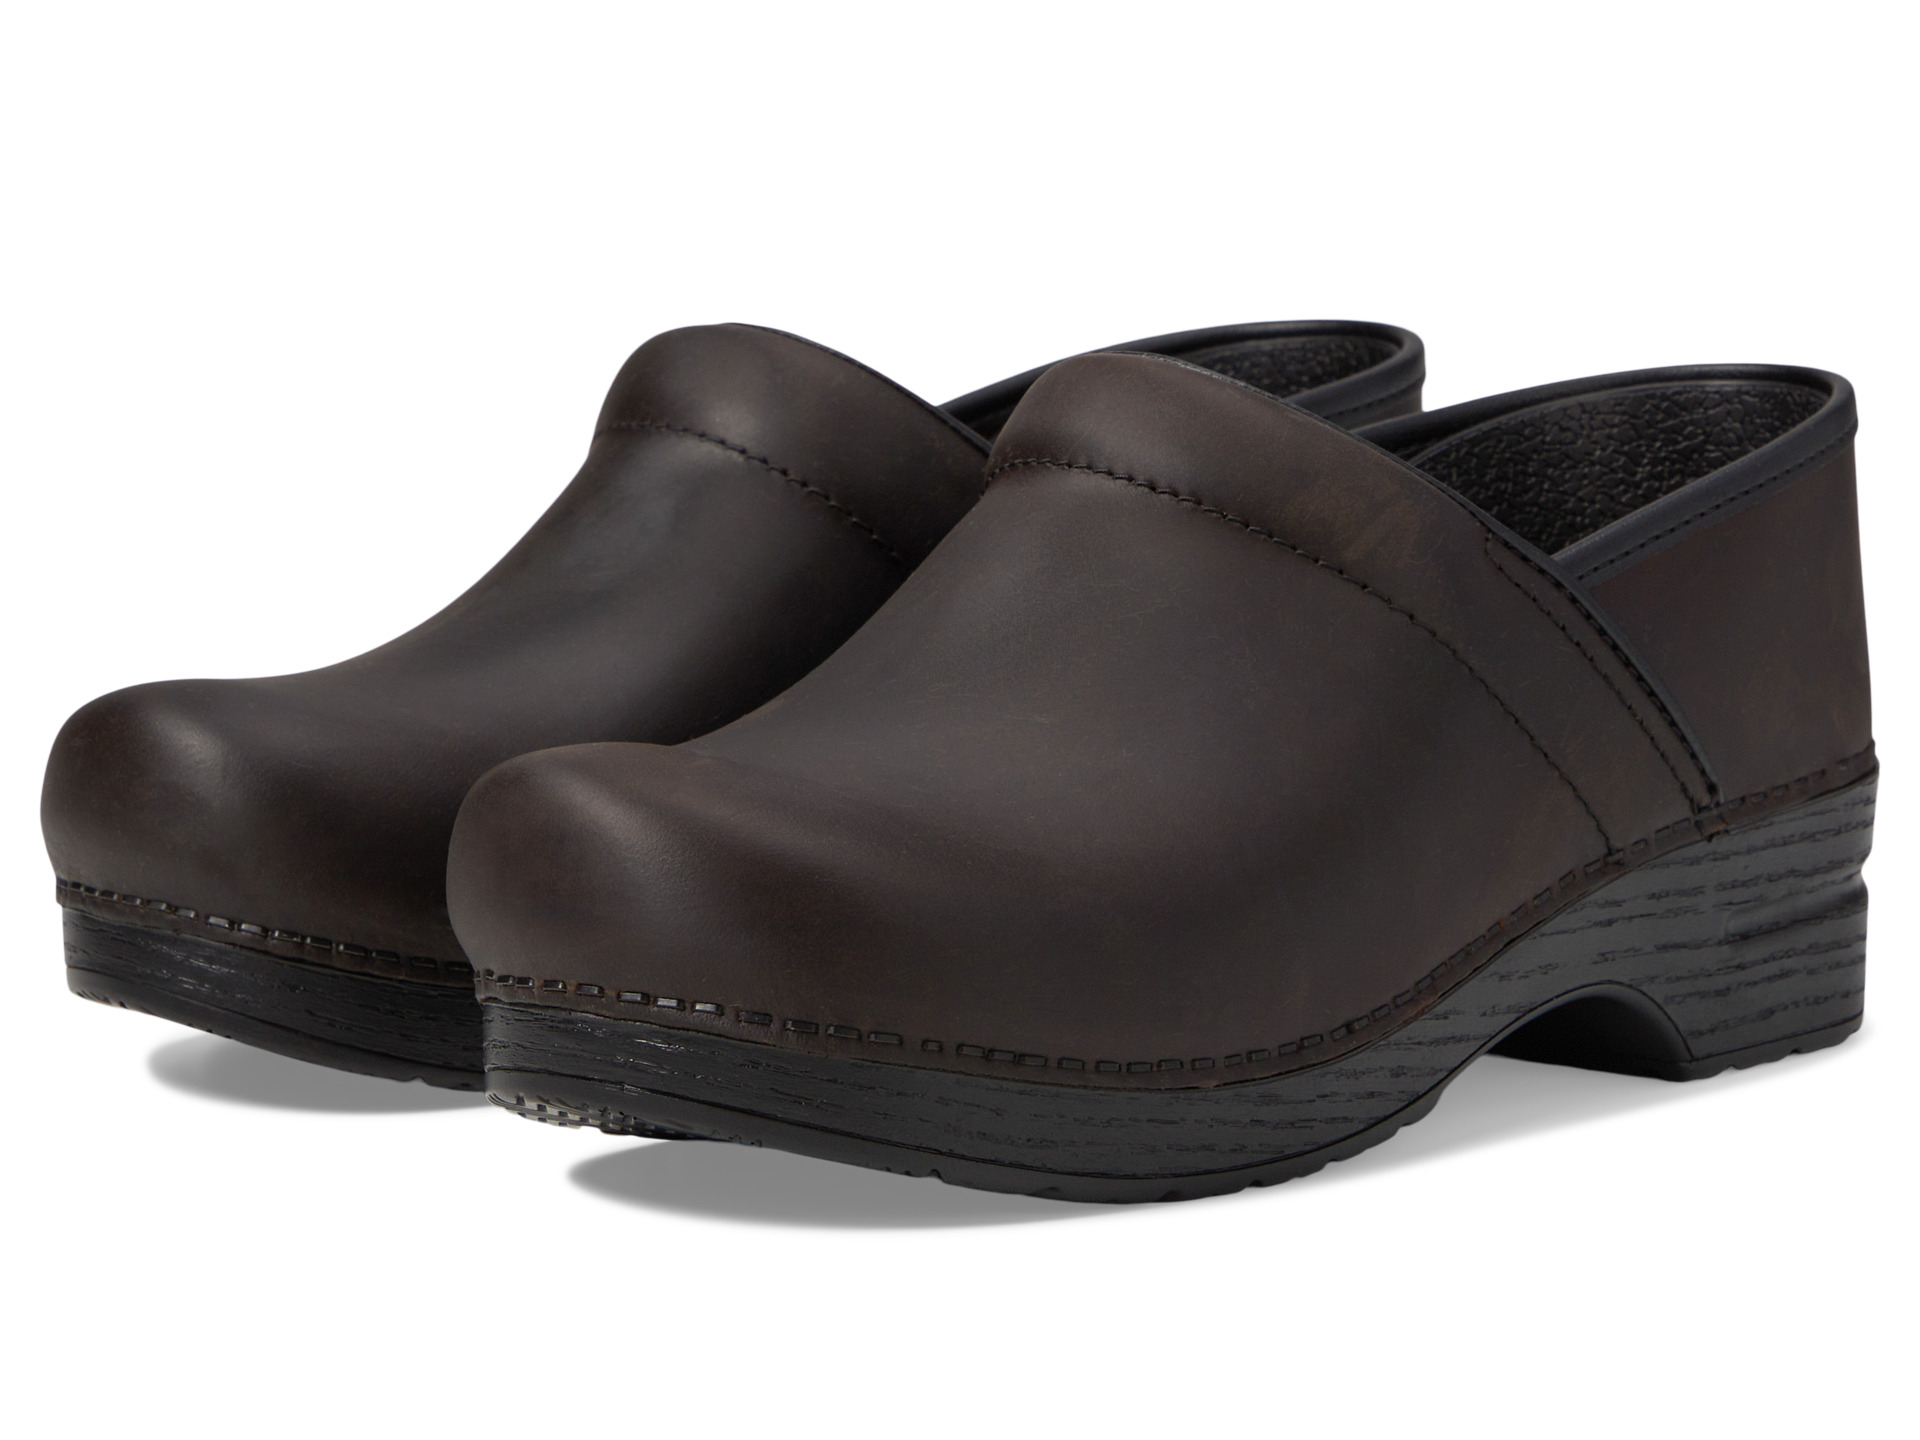 Dansko Professional Oiled Leather Antique Brown Oiled Leather